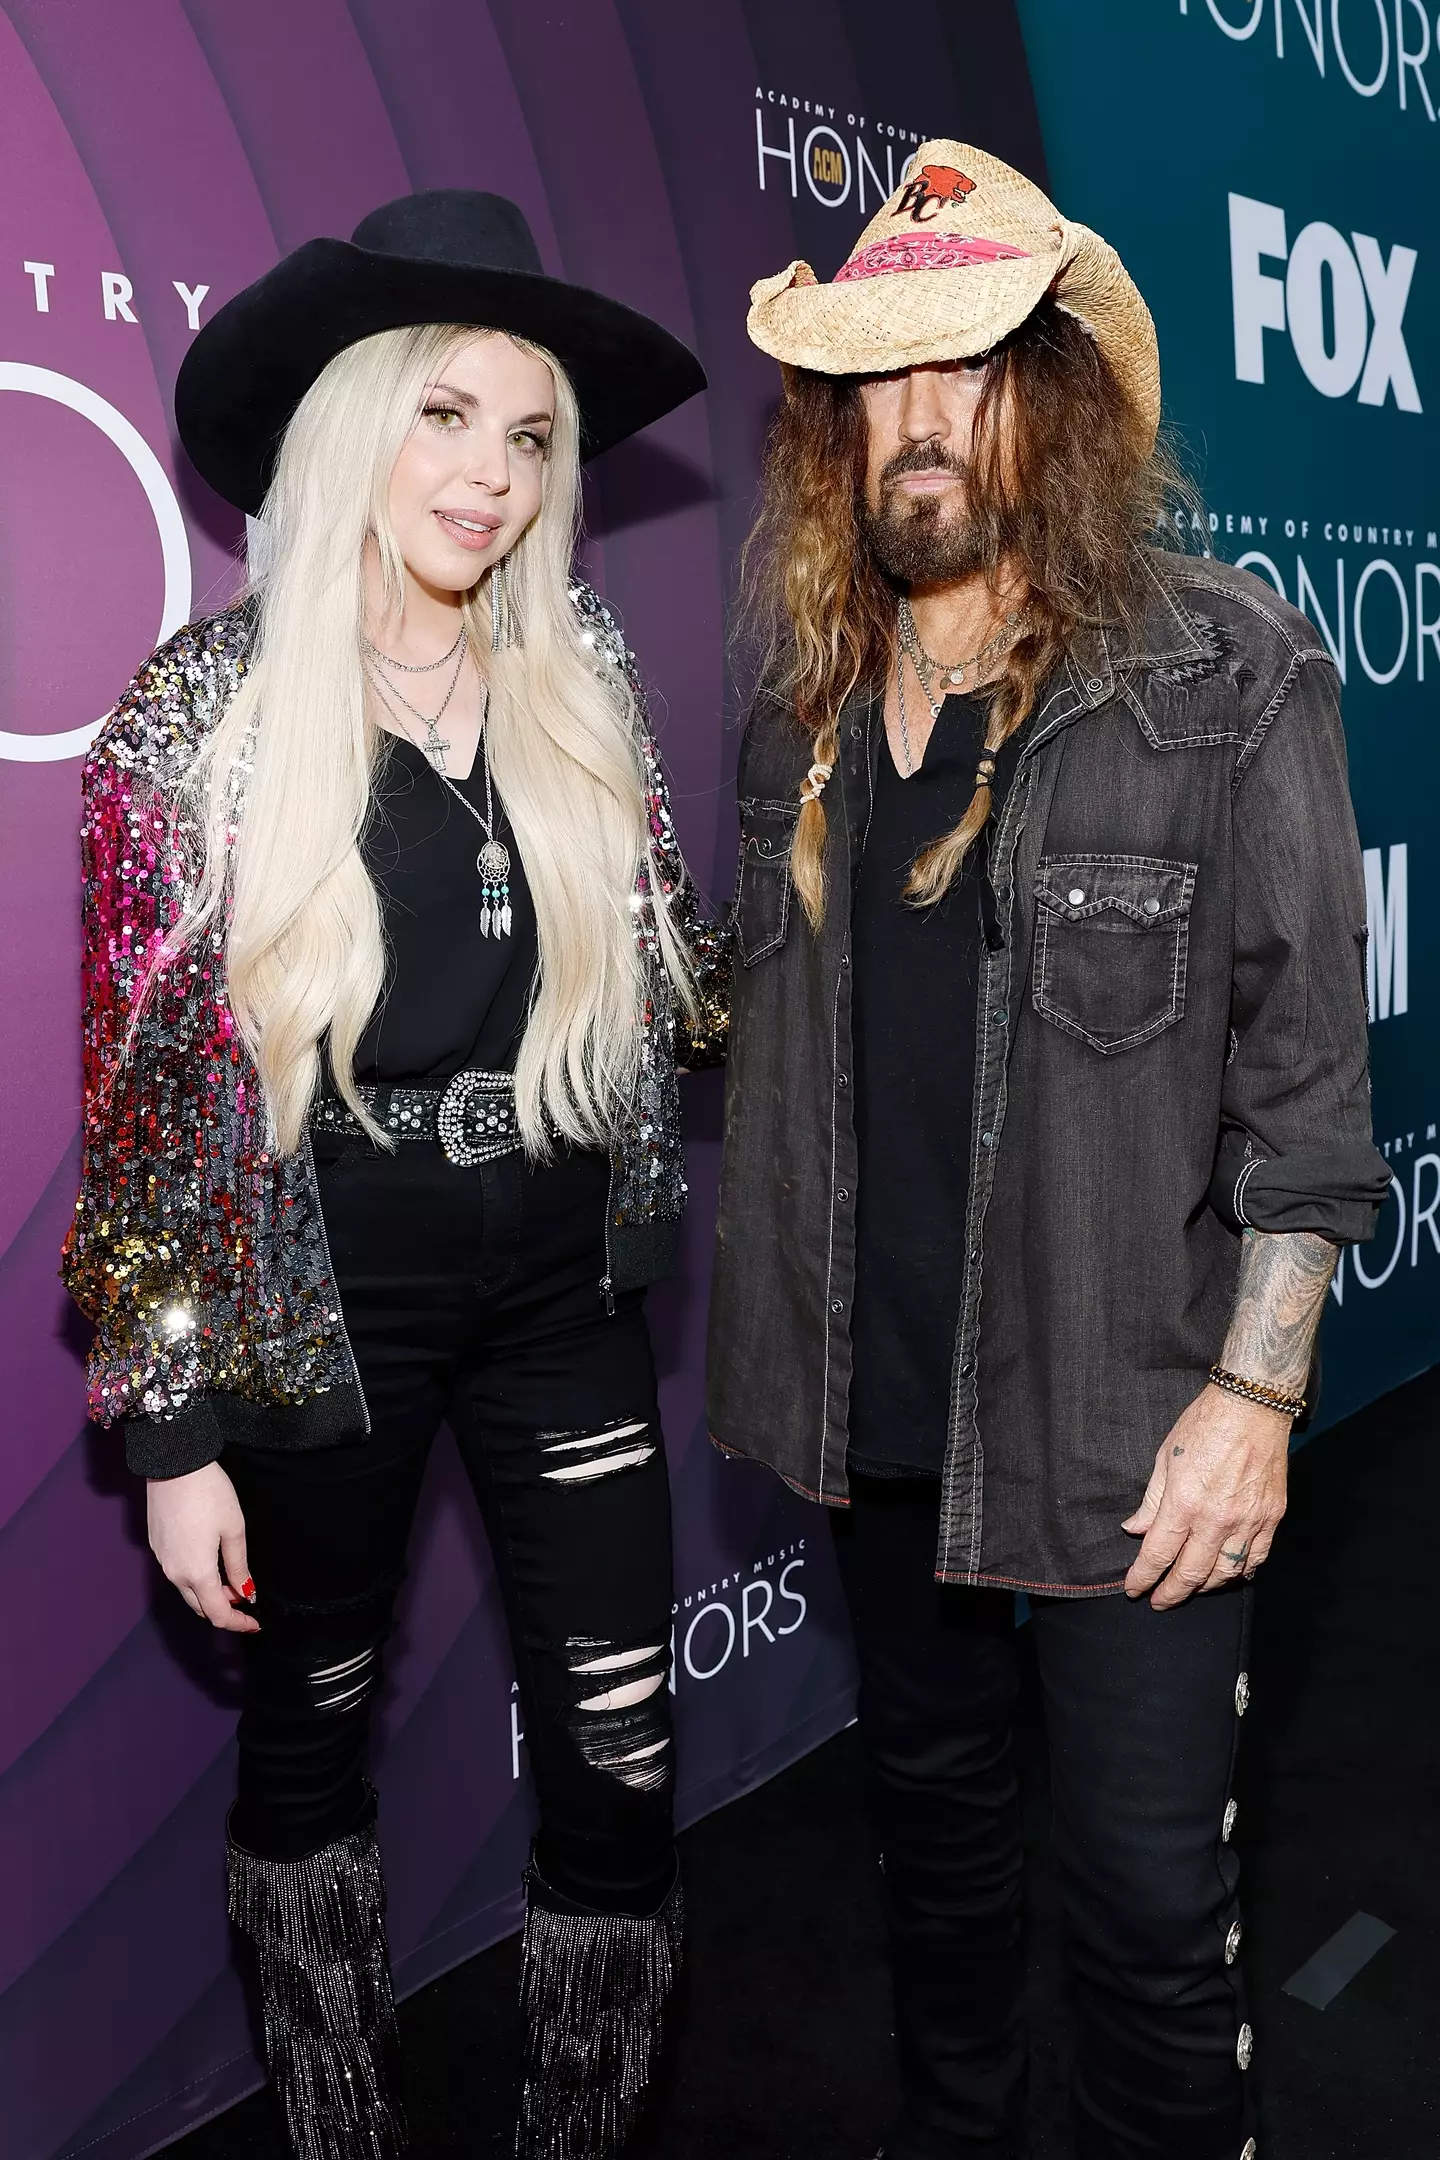 Billy Ray Cyrus and his new wife Firerose.